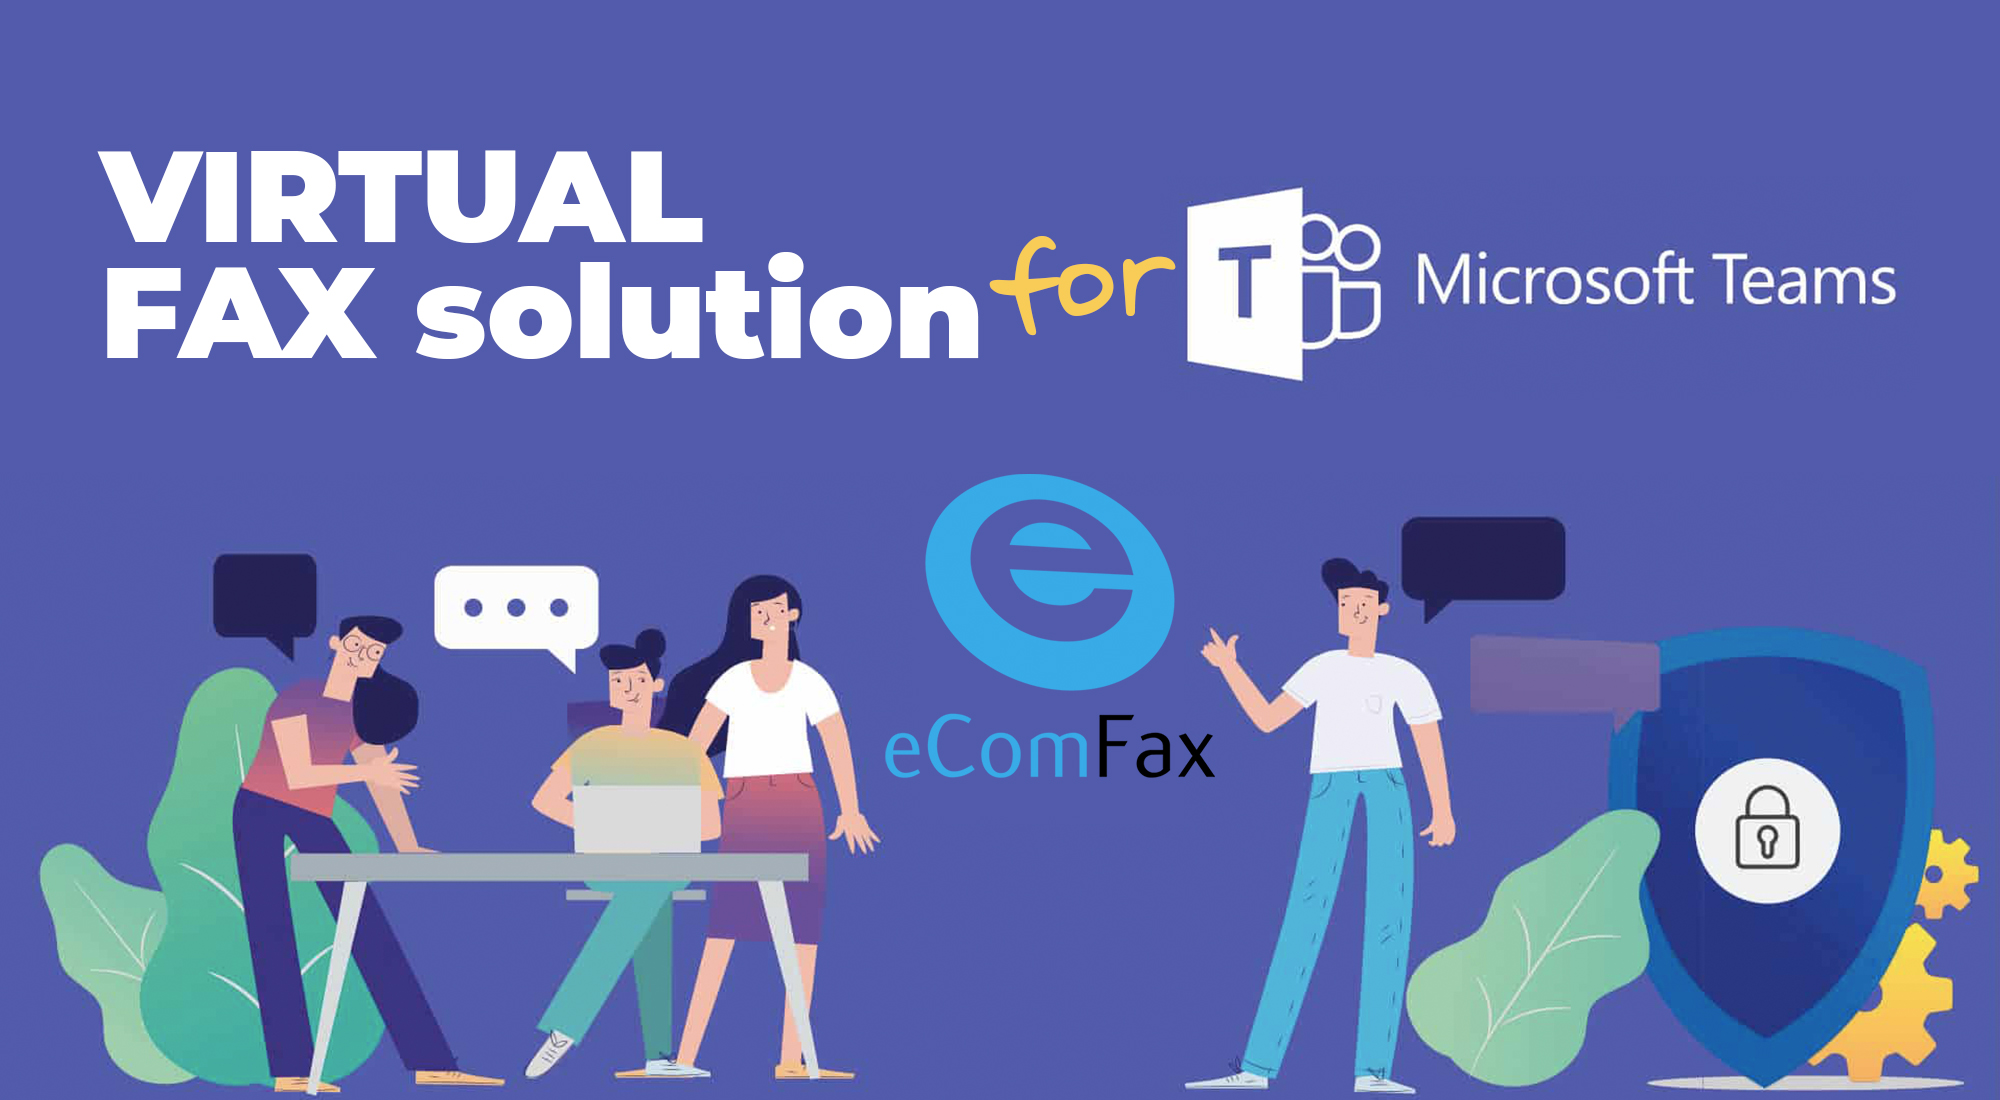 Fax, the missing link in Microsoft Teams?